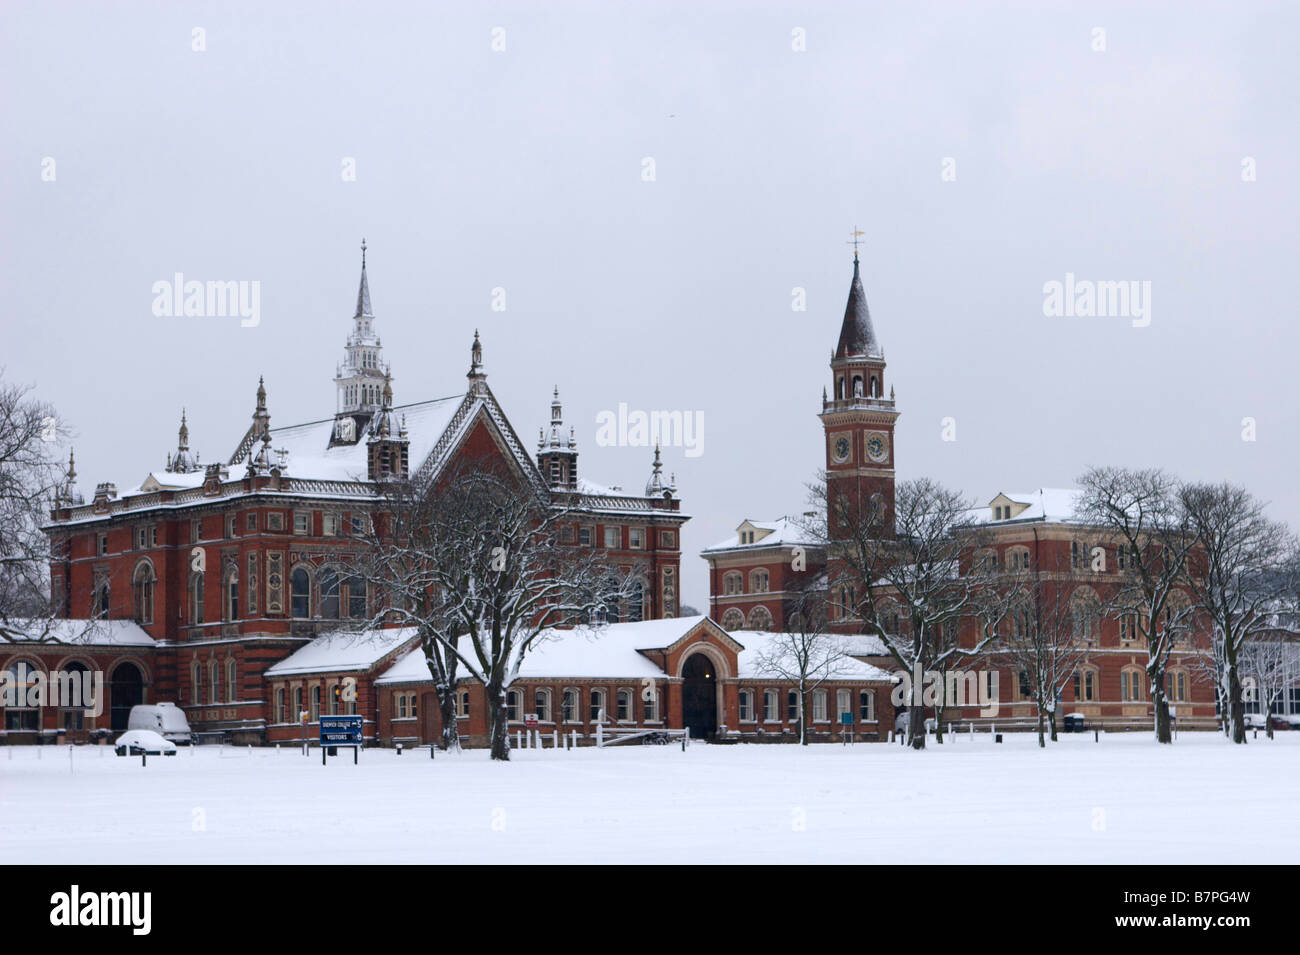 Dulwich college Stock Photo